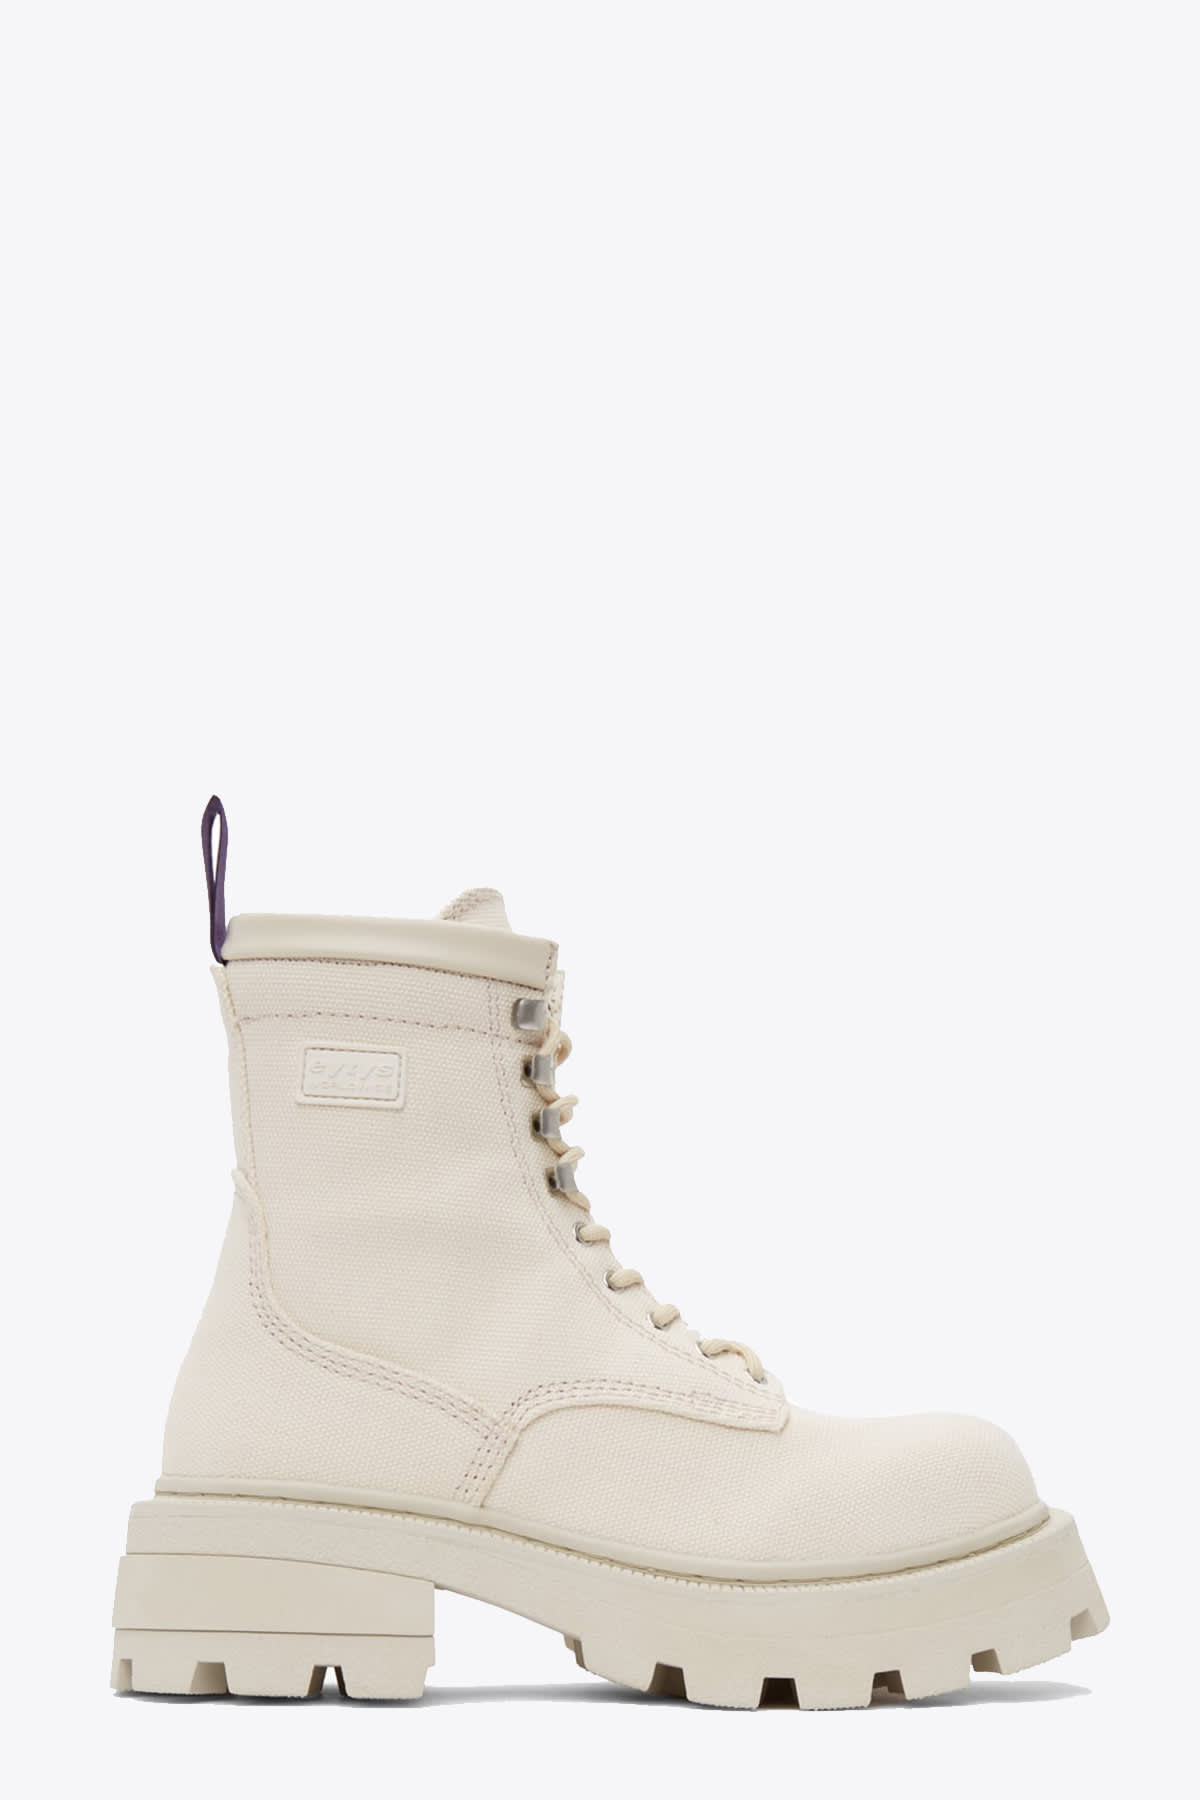 Eytys Off-white Canvas Ankle Boots